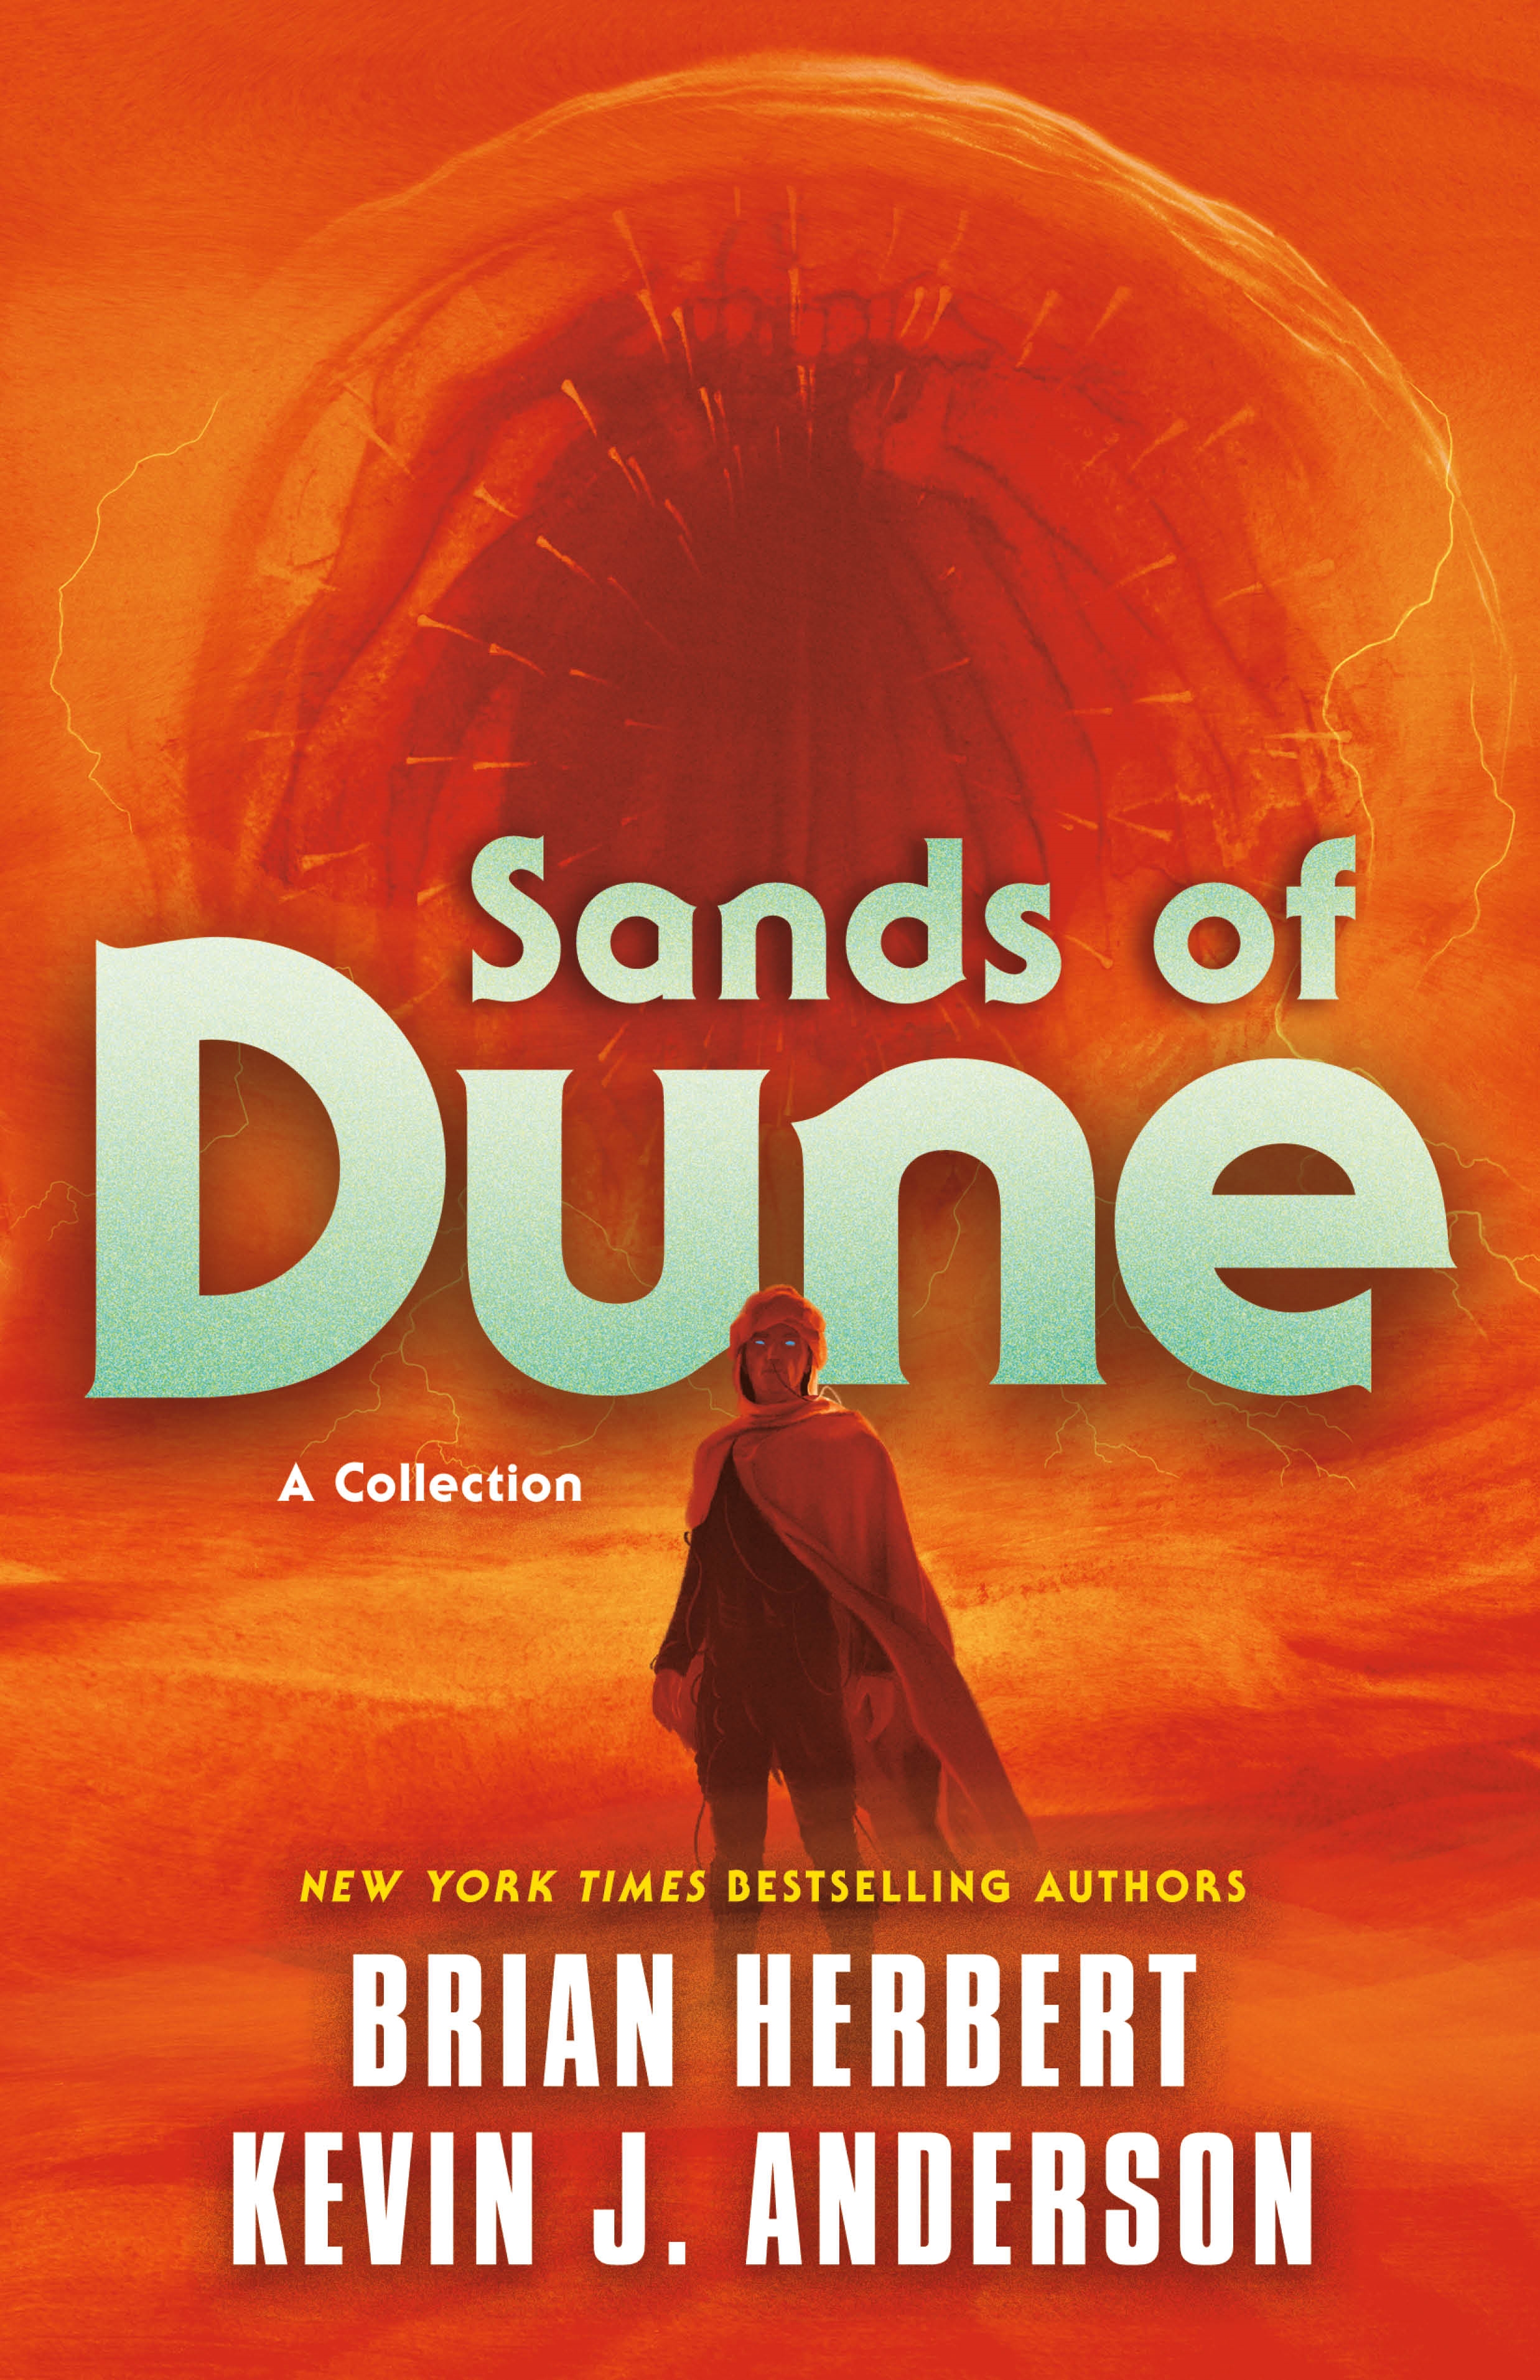 Sands of Dune : Novellas from the Worlds of Dune by Brian Herbert, Kevin J. Anderson